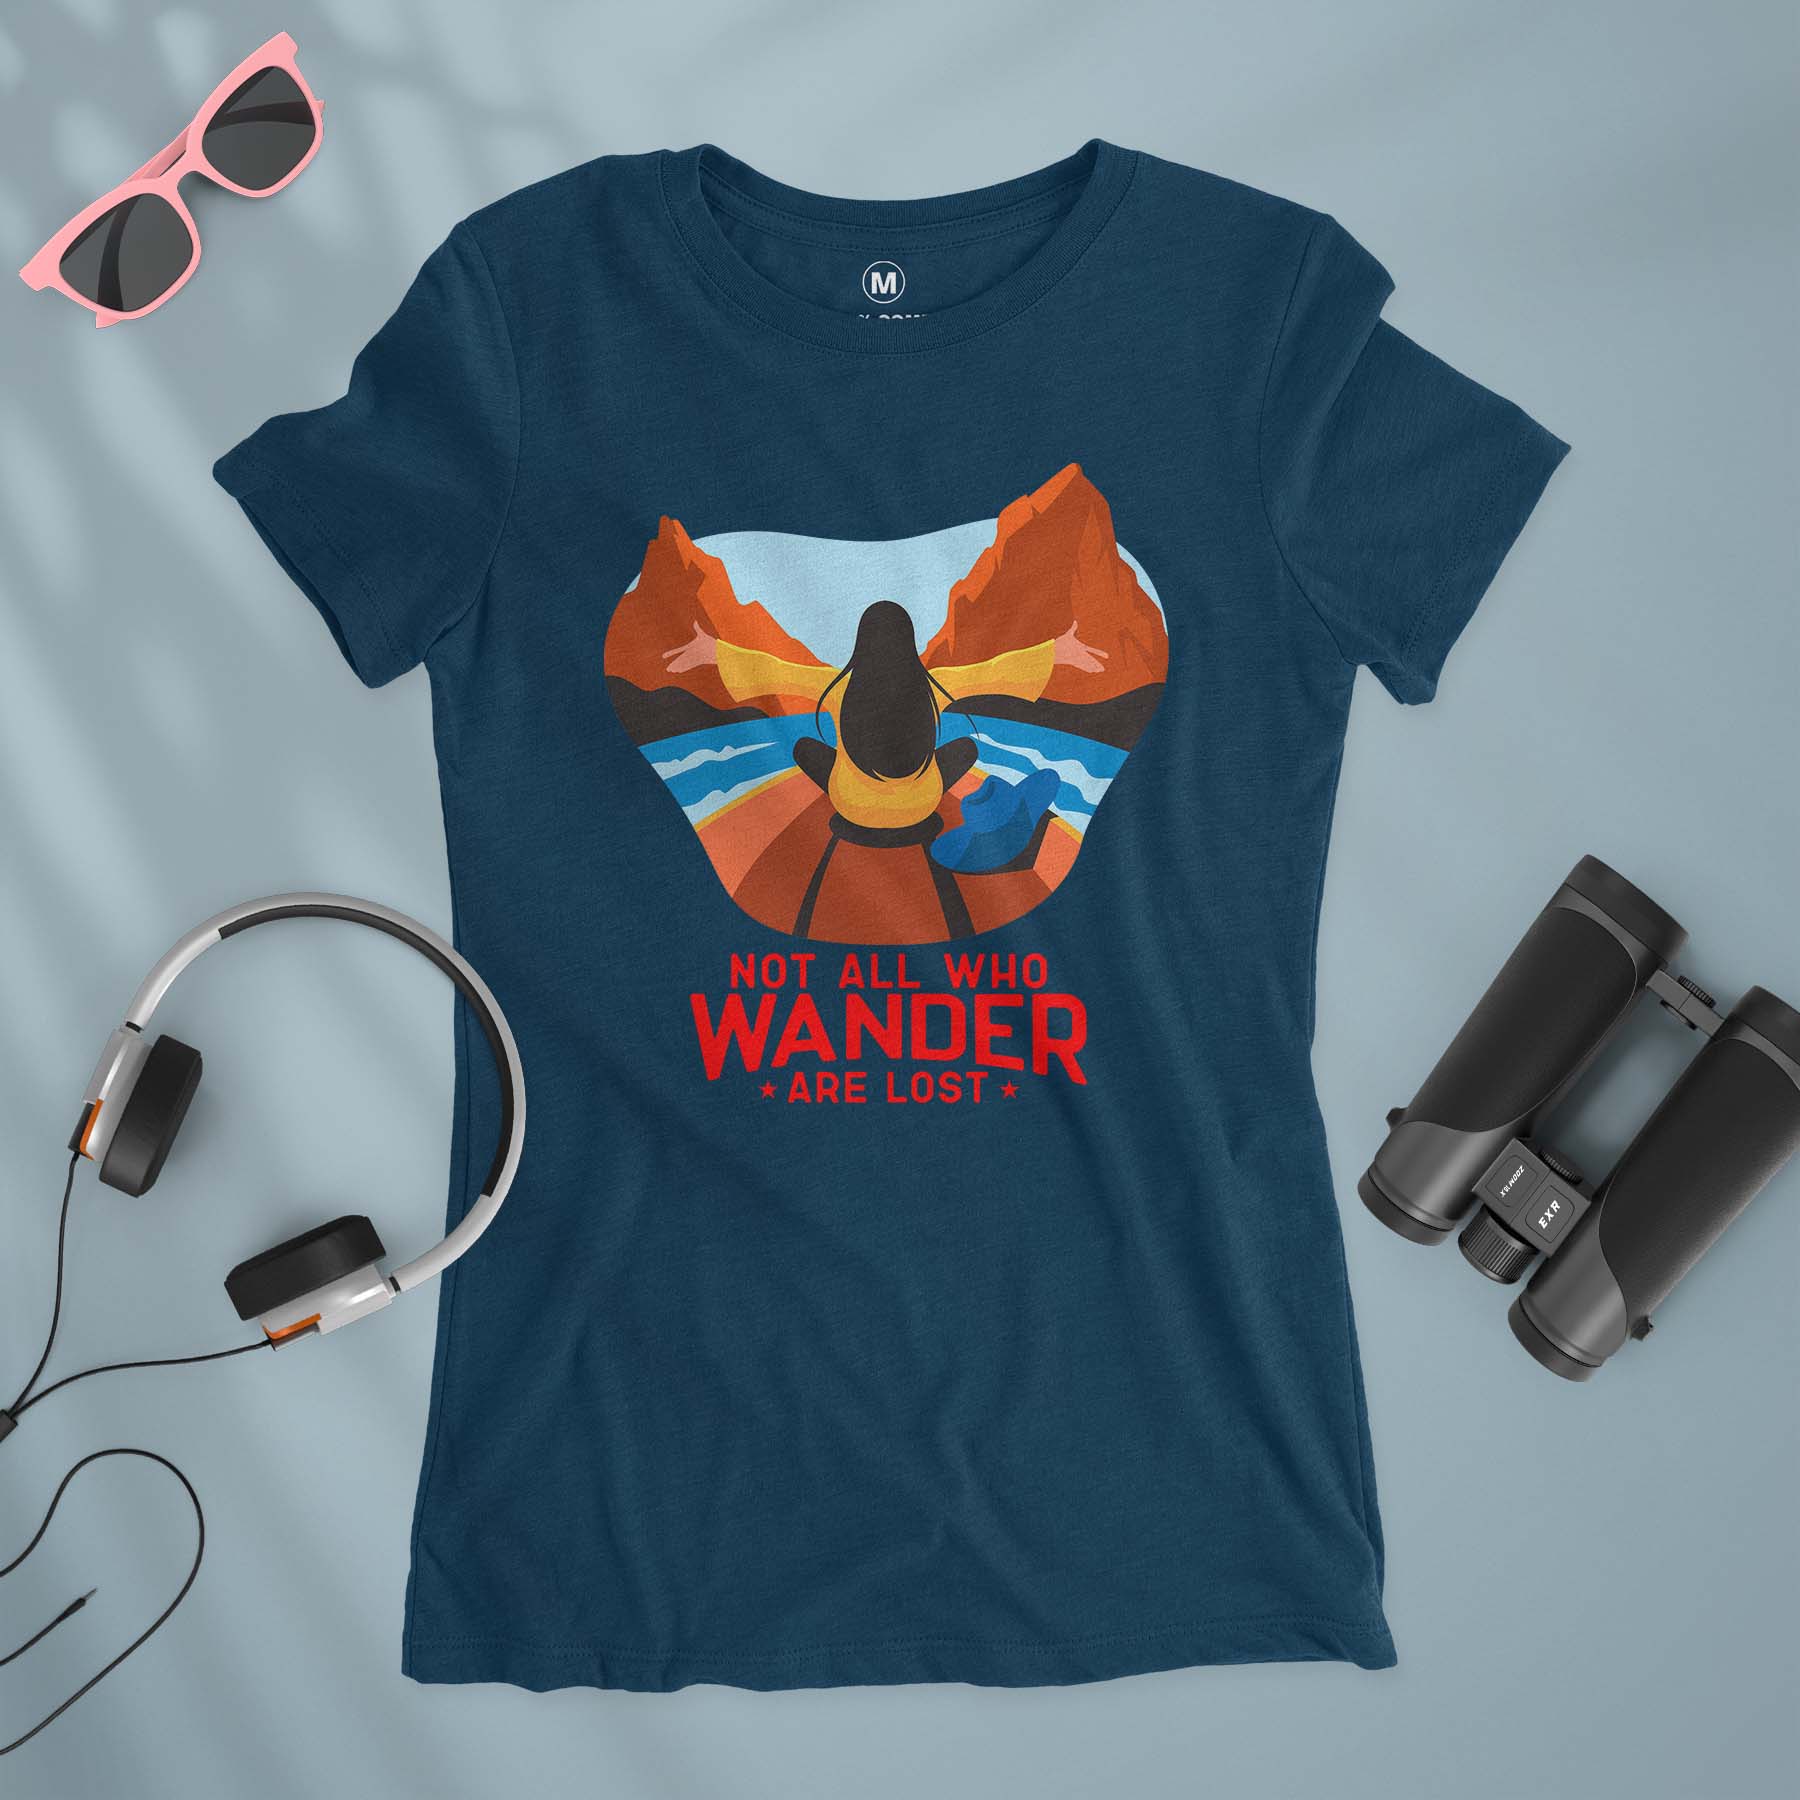 Not All Who Wander Are Lost - Women T-shirt